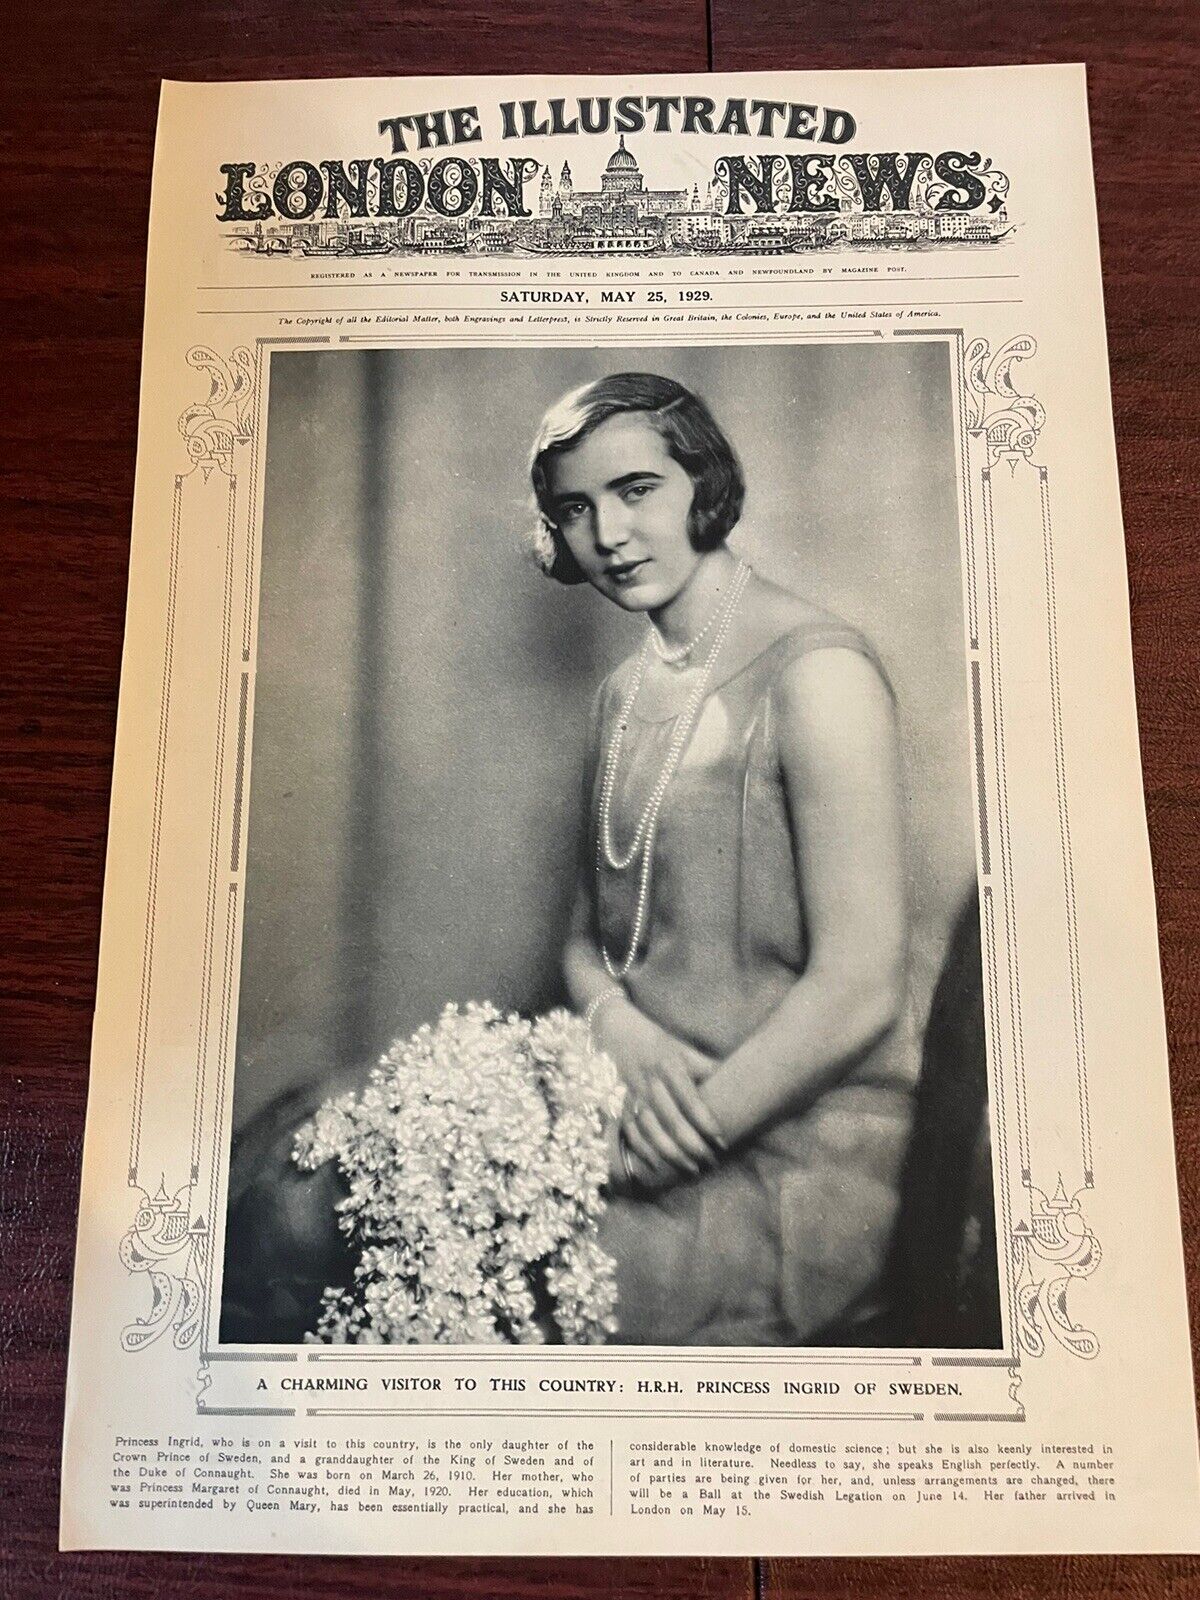 Princess Ingrid of Sweden Photo Visitor Connaught Illustrated London News 1929